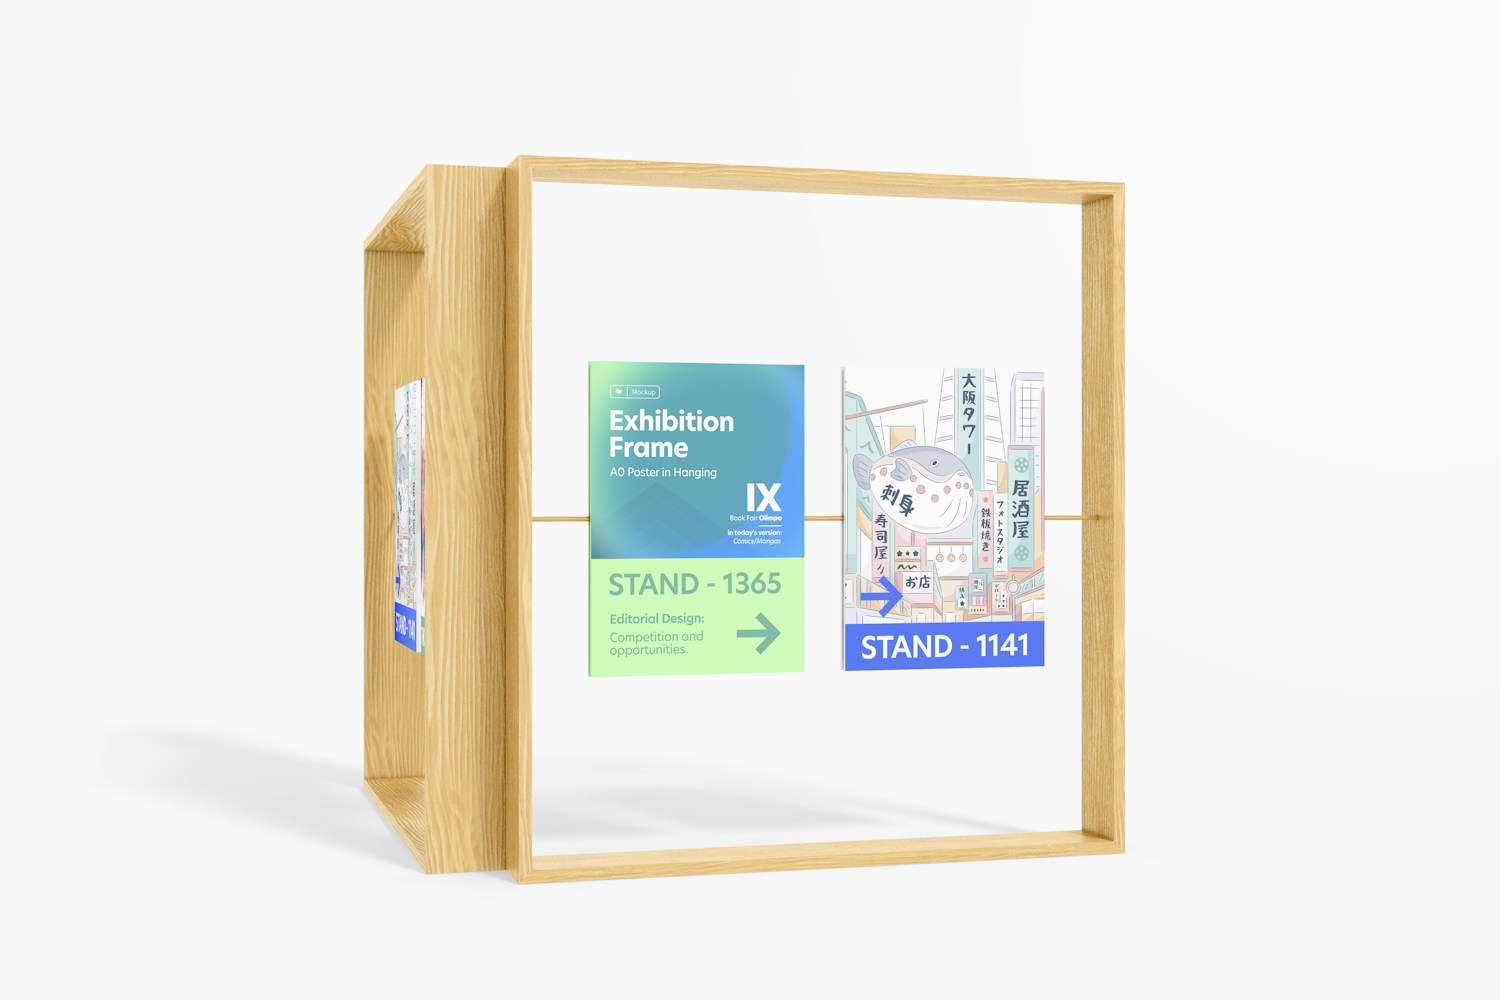 A0 Poster in Hanging Exhibition Frame Mockup, Perspective